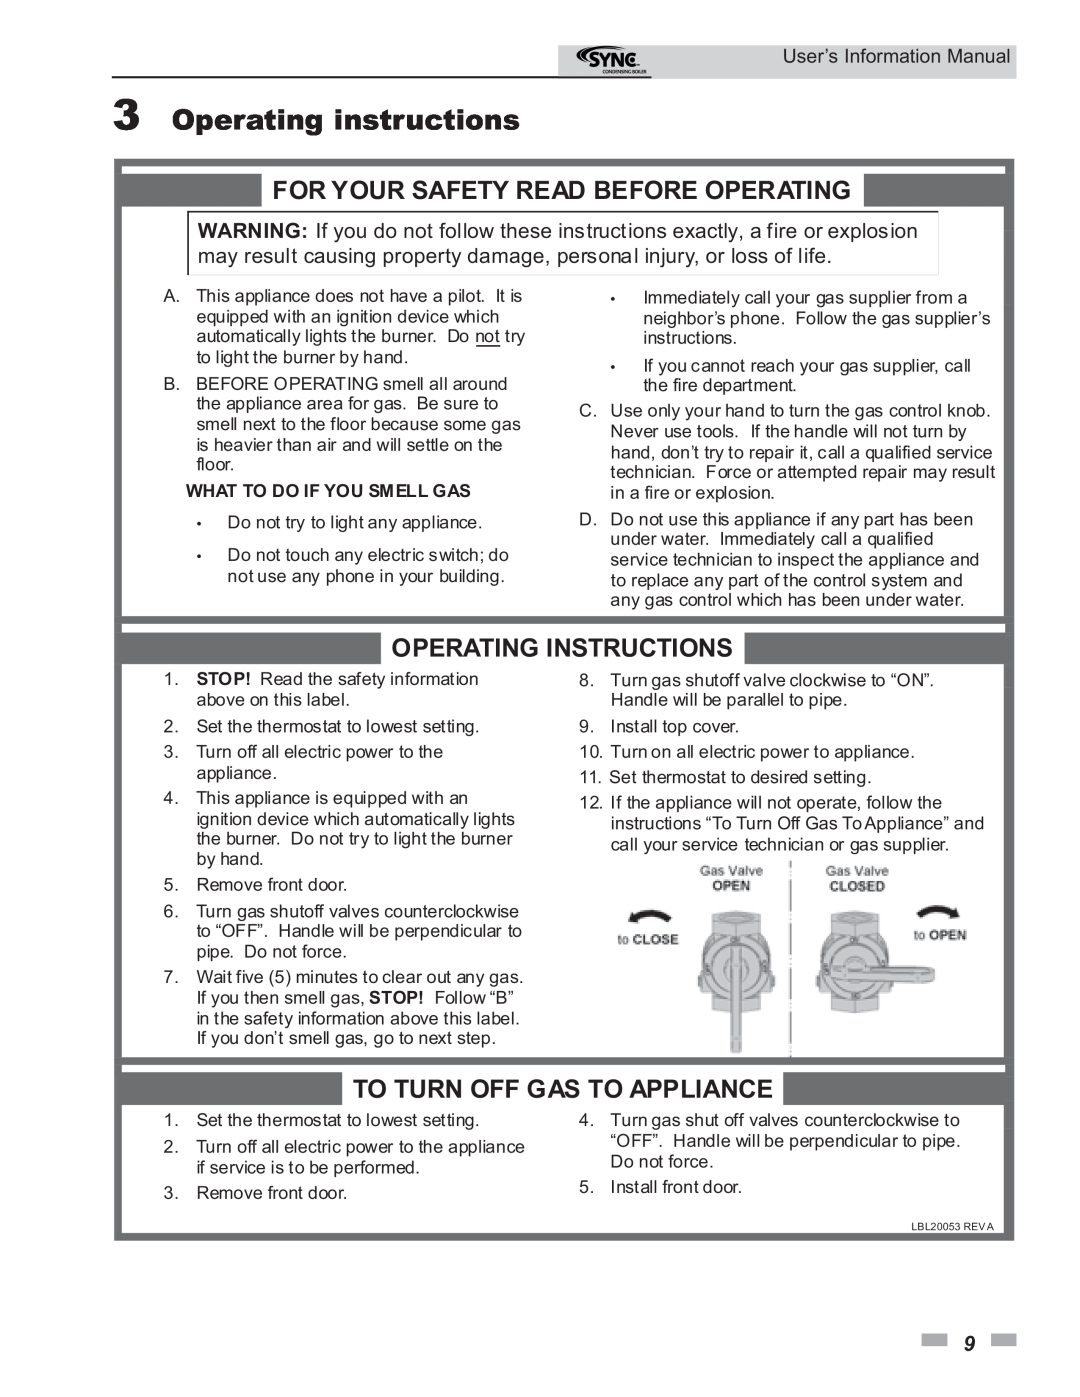 Lochinvar 1.3, 1.5, 1.0 manual 3Operating instructions, For Your Safety Read Before Operating, Operating Instructions 